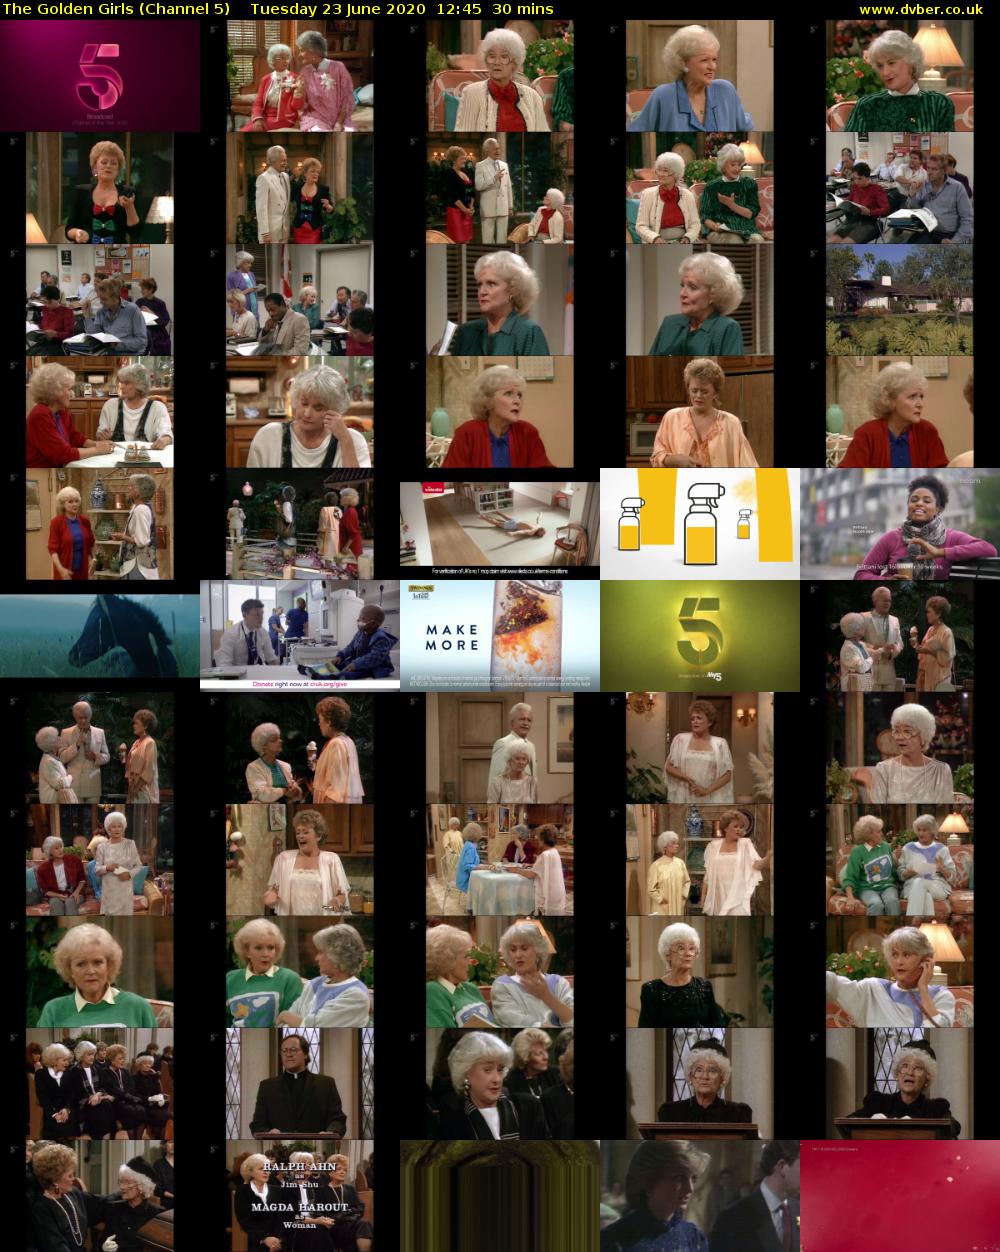 The Golden Girls (Channel 5) Tuesday 23 June 2020 12:45 - 13:15